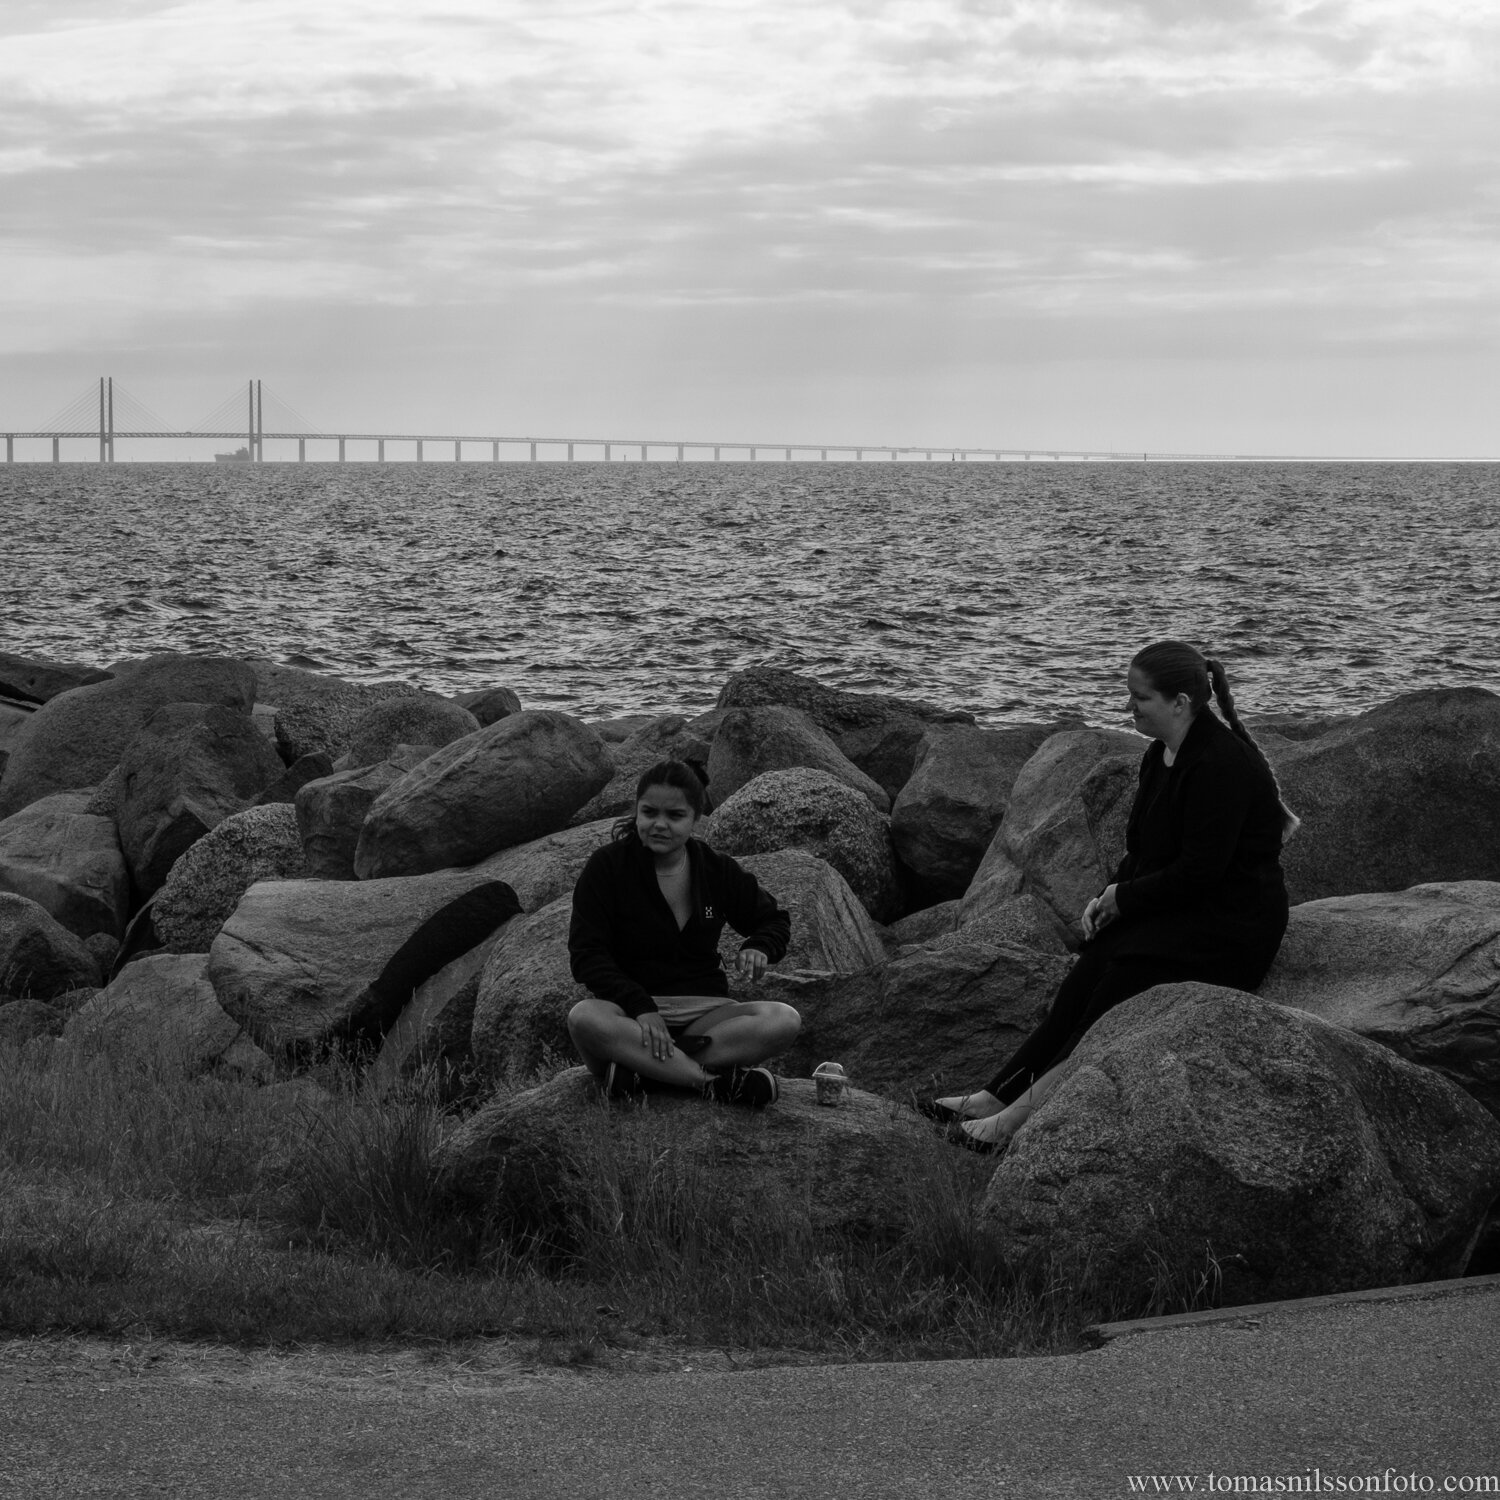 Day 188 - July 7: Seaside Chat